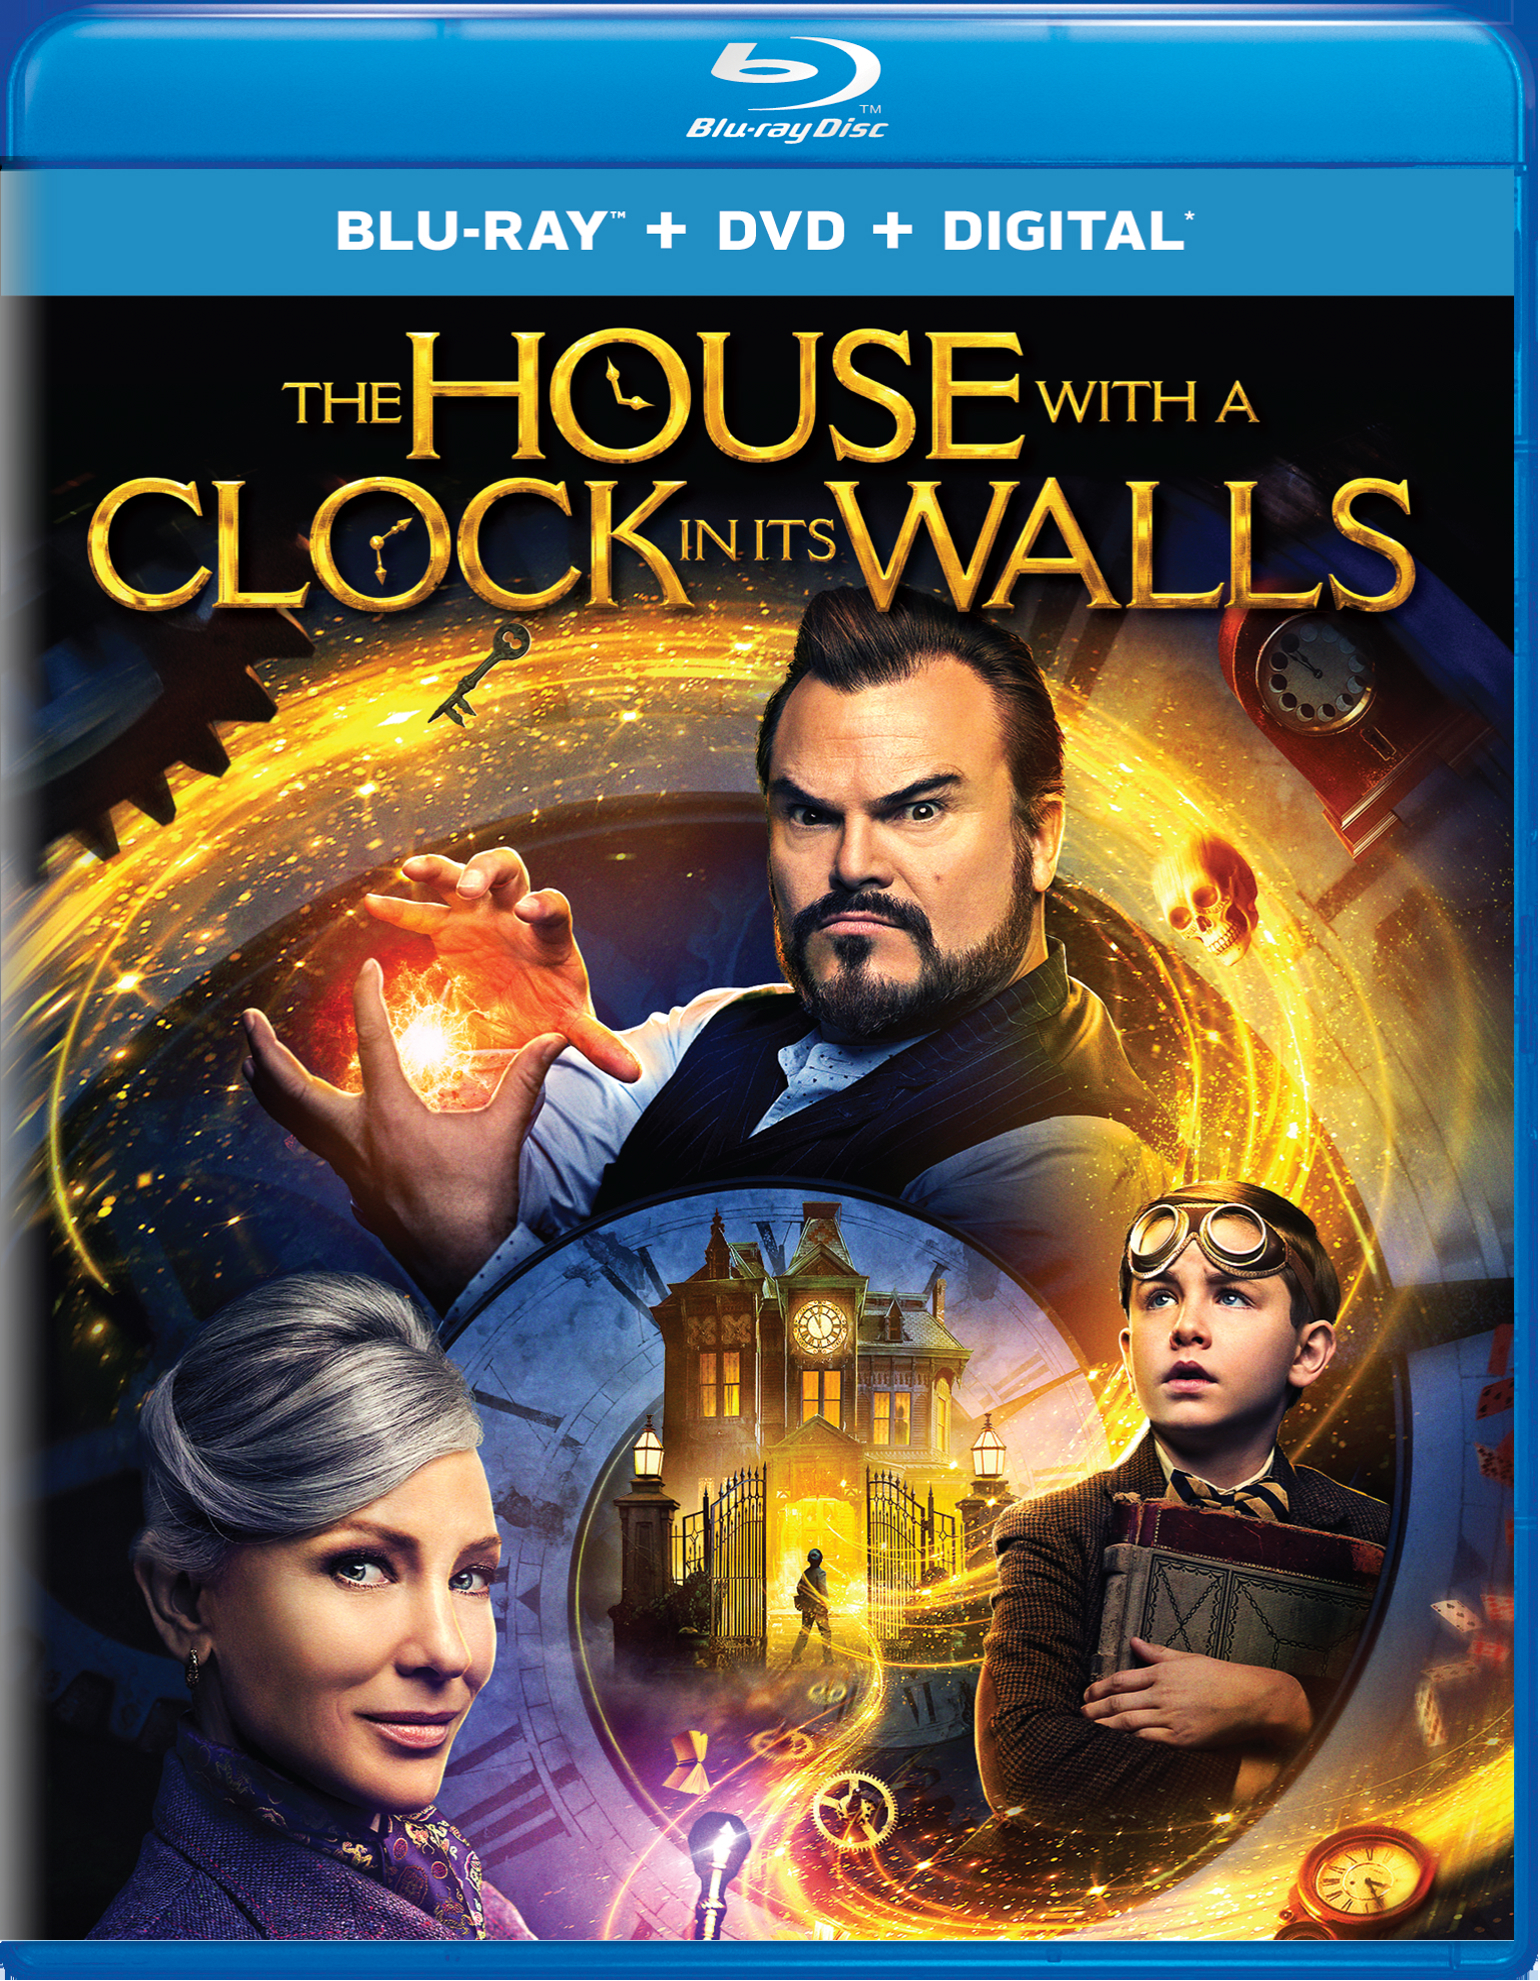 The House With A Clock In Its Walls (DVD + Digital) - Blu-ray [ 2018 ]  - Adventure Movies On Blu-ray - Movies On GRUV